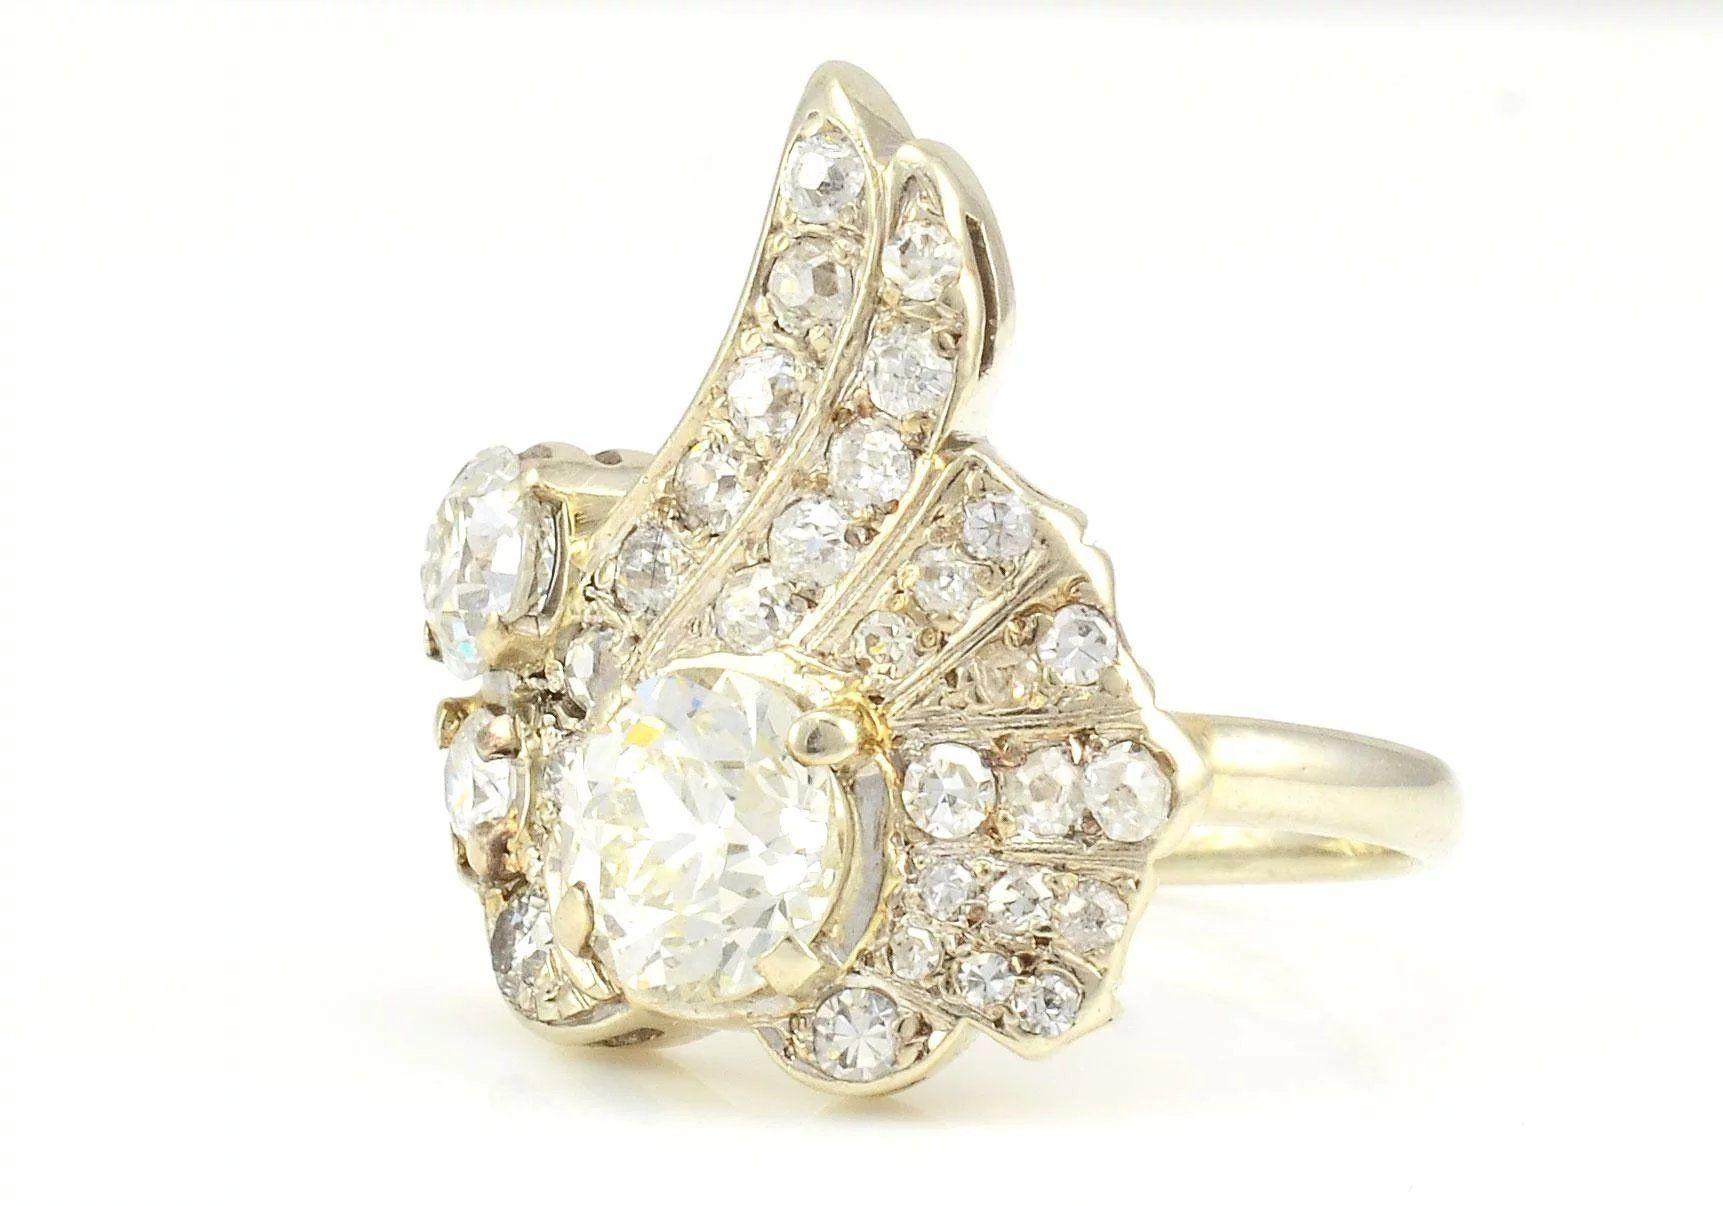 Vintage 14 karat white gold 1.20 carat center diamond cocktail ring, circa 1950. This ring has a center Old European cut diamond at 1.20 carats SI2 clarity L color, one Old European cut accent diamond at 0.45 carat SI2 clarity H color and 29 accent